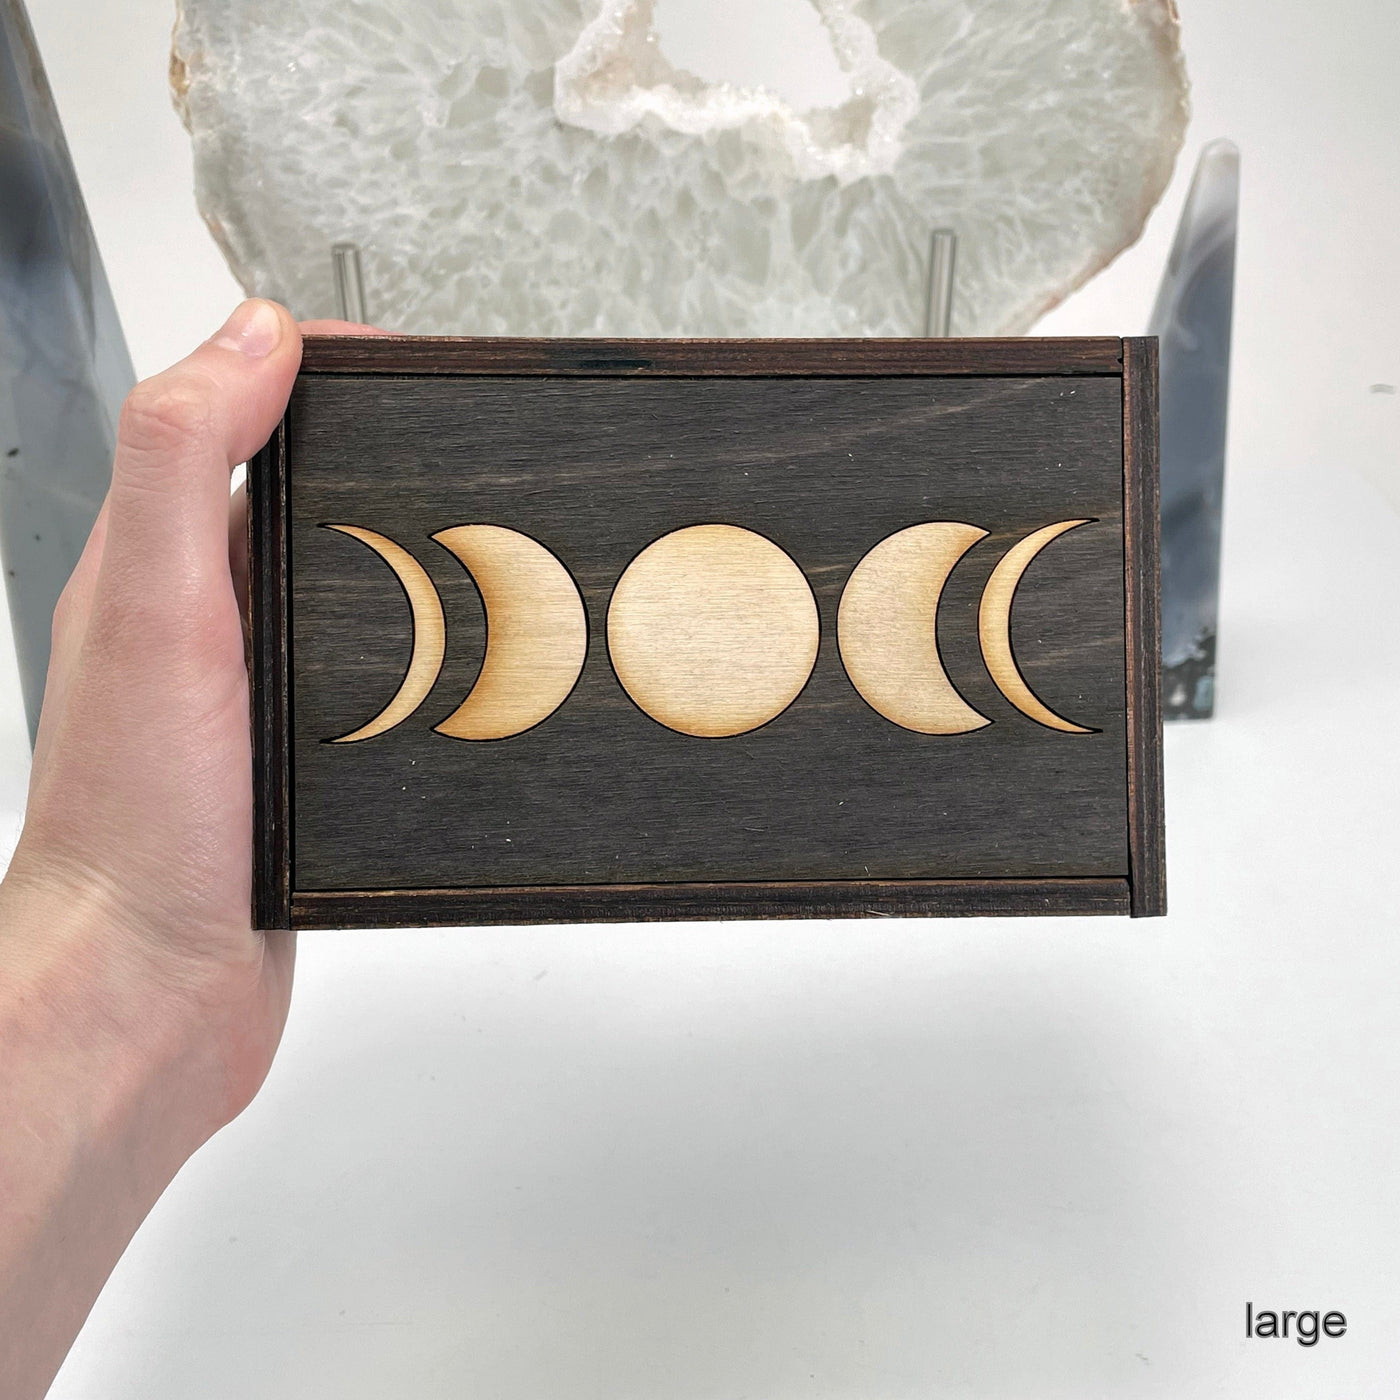 large moon phase wooden storage box in hand for size reference